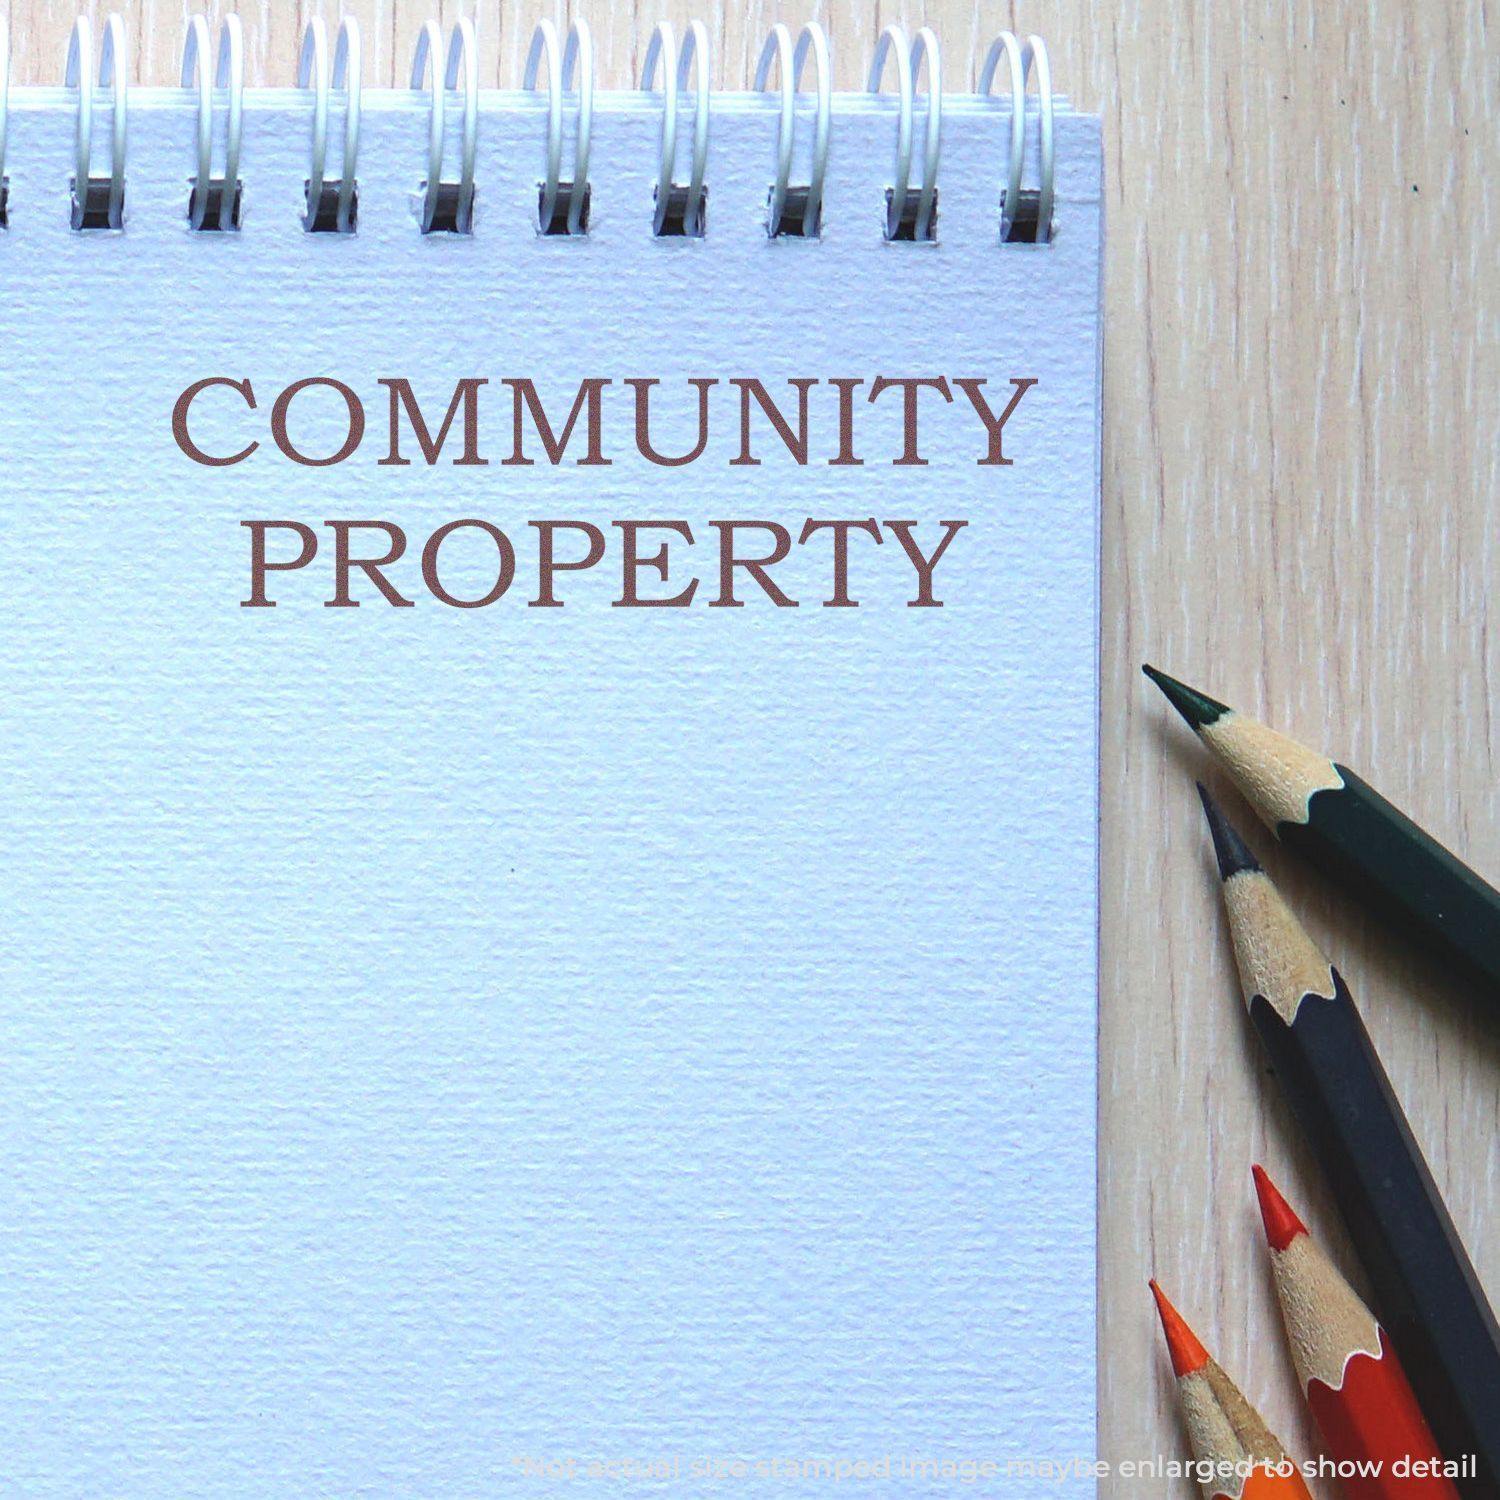 A self-inking stamp with a stamped image showing how the text "COMMUNITY PROPERTY" in a large bold font is displayed by it.